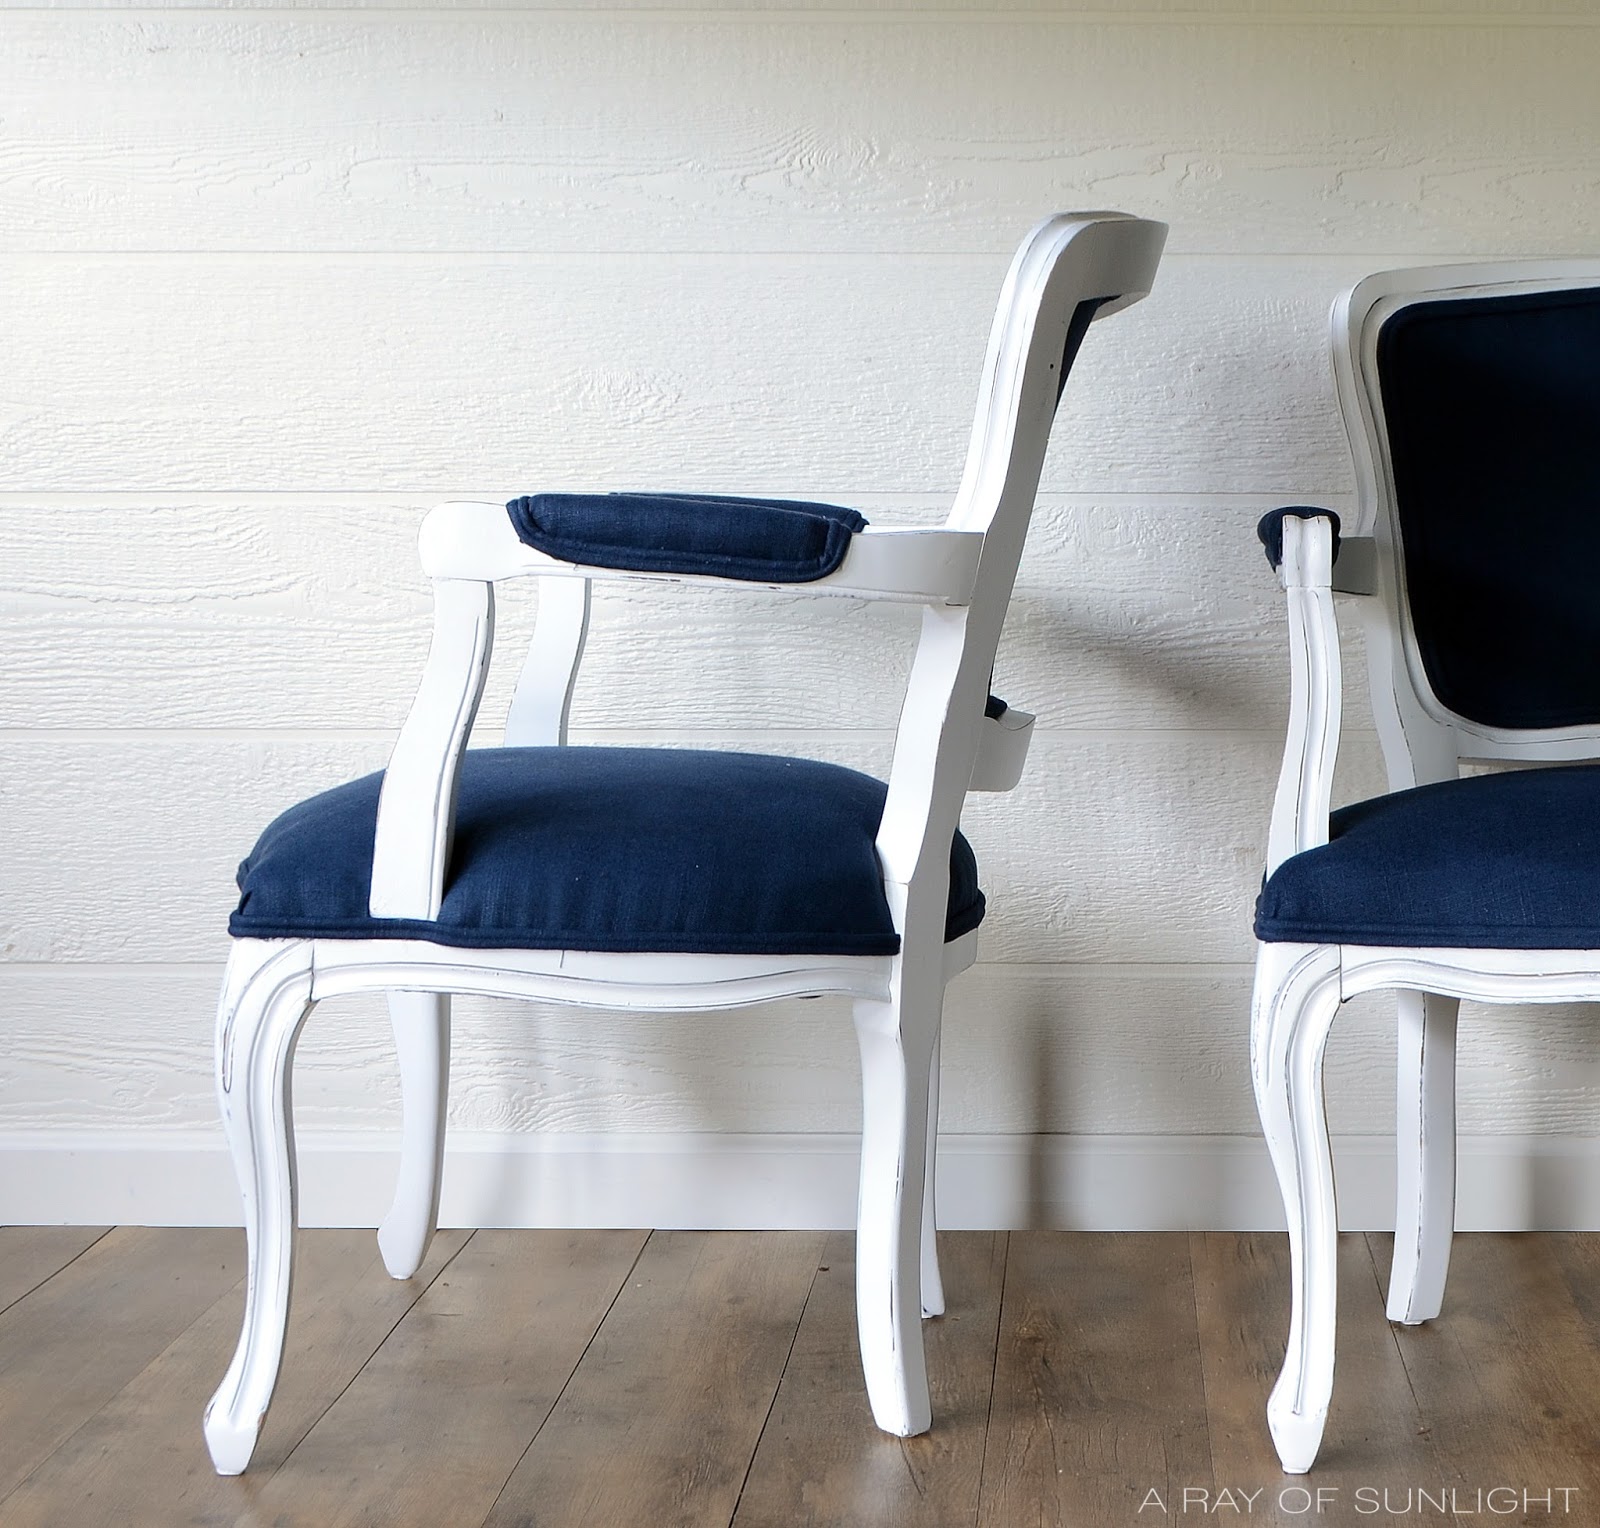 How to easily update old worn out thrift store chairs with some paint and fabric by A Ray of Sunlight Furniture. Love the navy blue and white makeover!